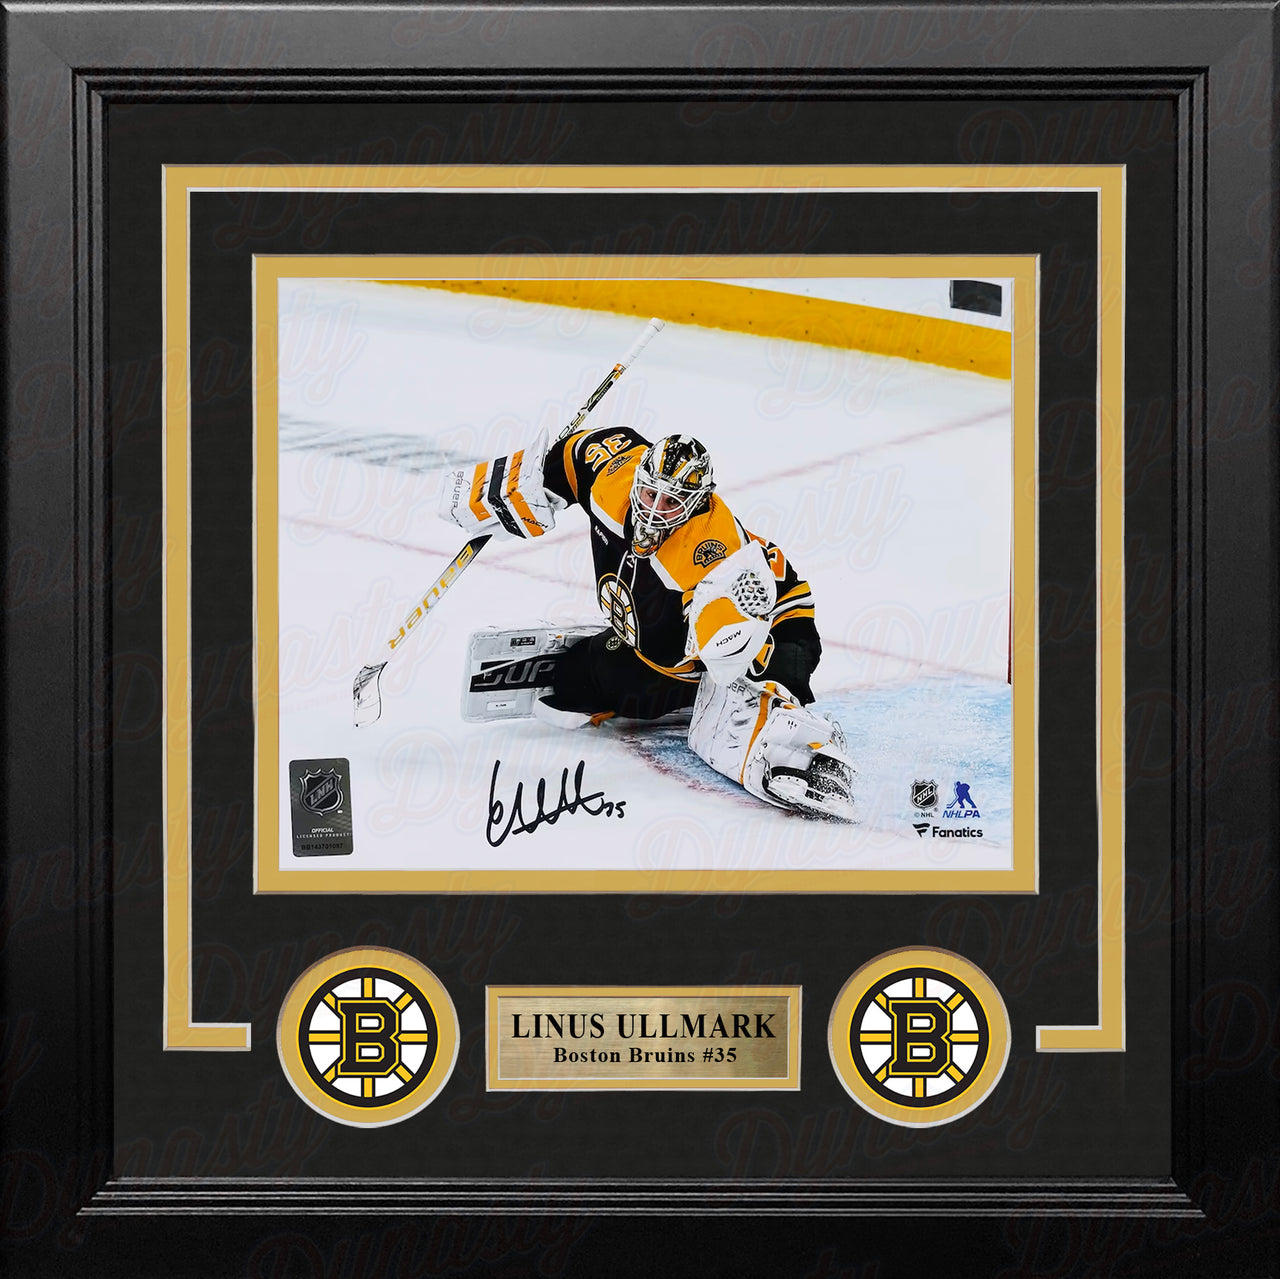 Linus Ullmark in Action Boston Bruins Autographed Framed Hockey Photo - Dynasty Sports & Framing 